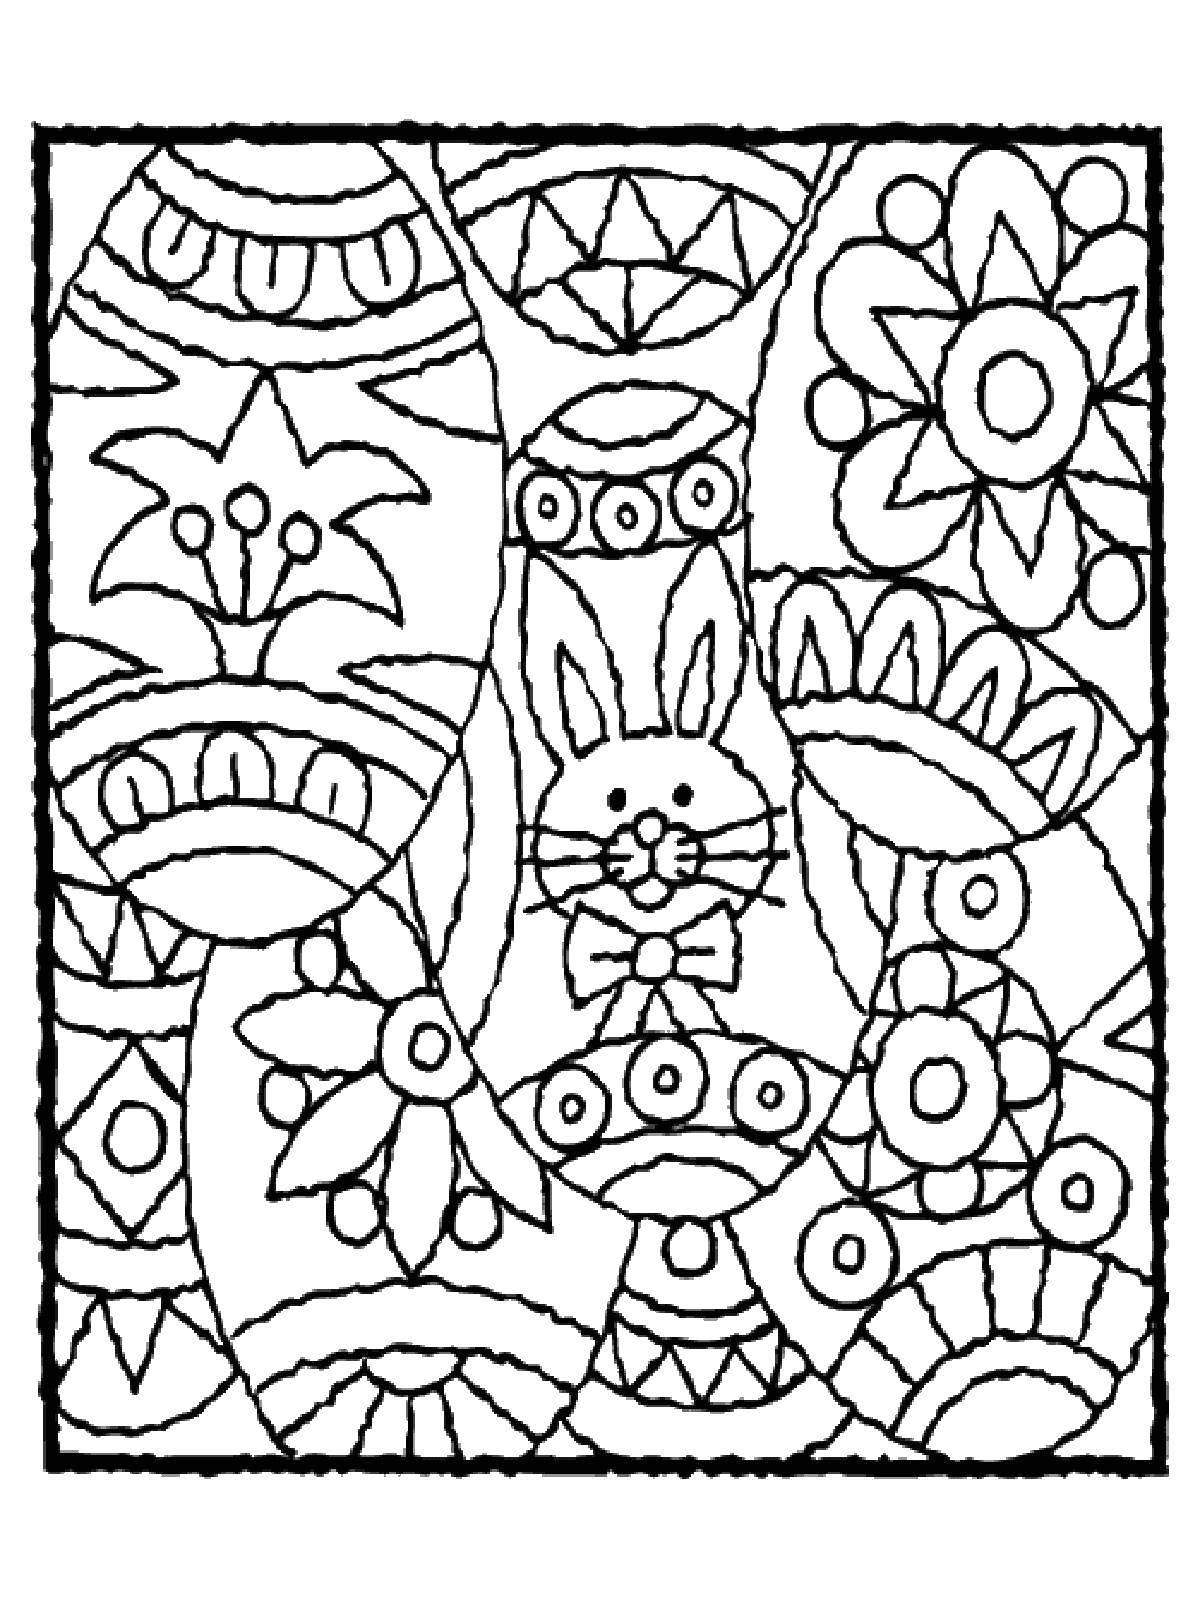 Coloring Easter eggs. Category coloring Easter. Tags:  eggs, Easter, rabbit.